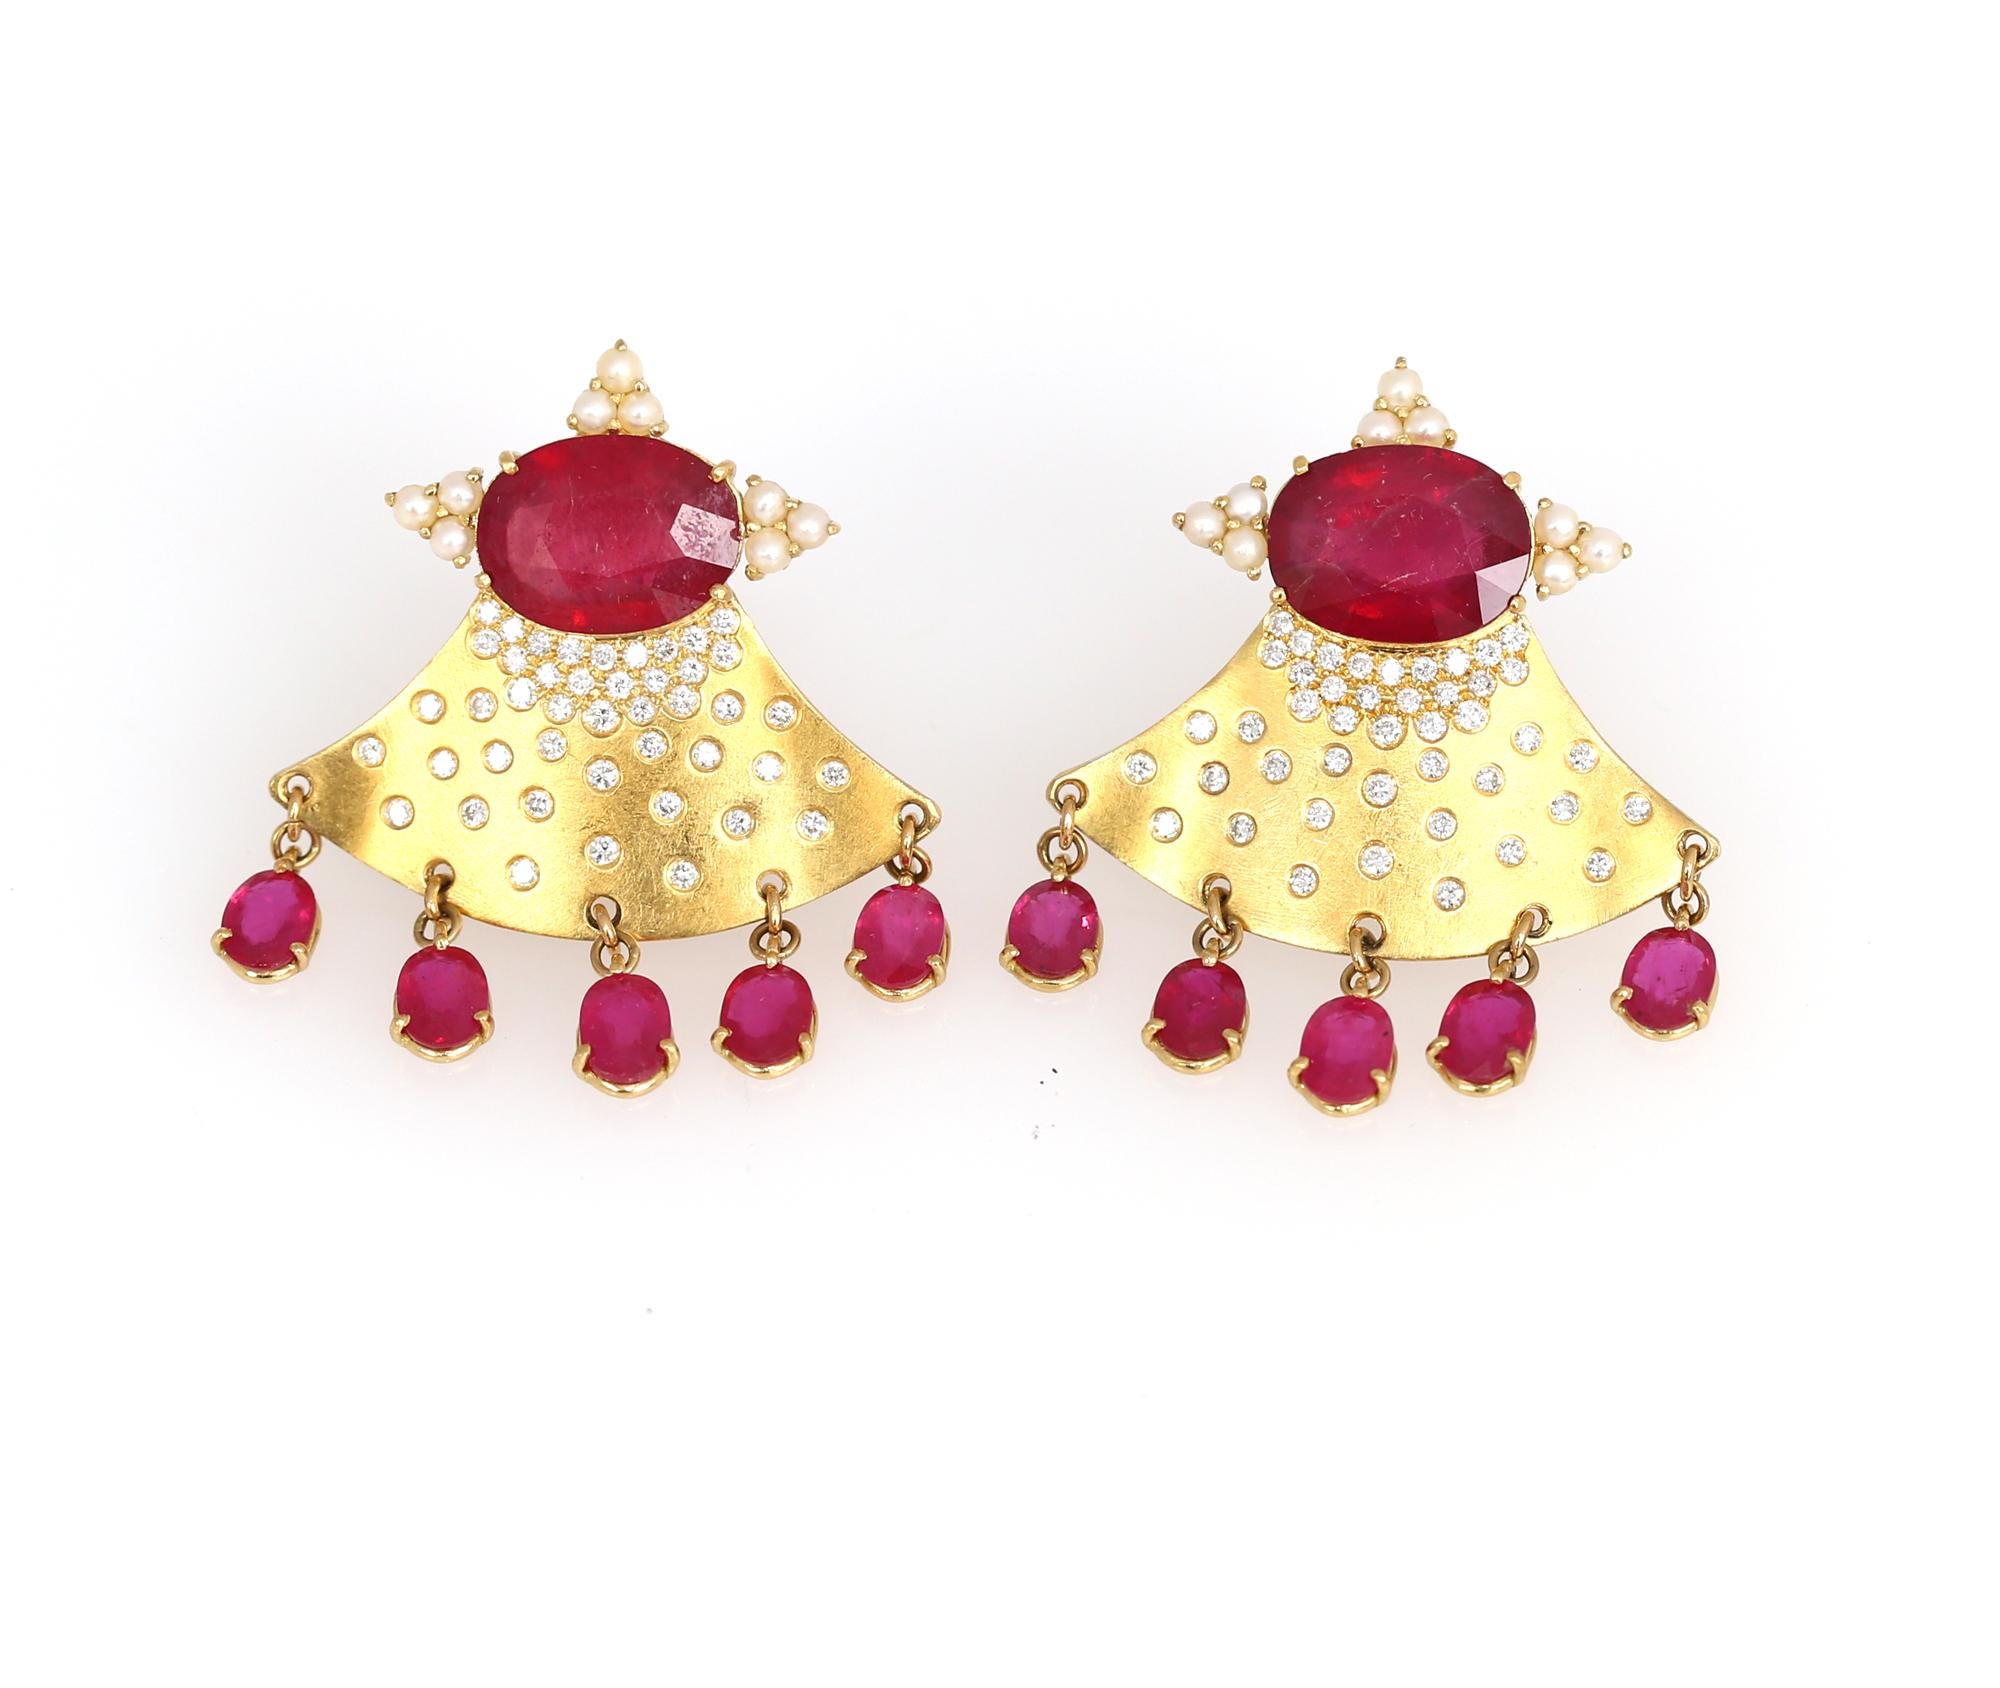 
Rubies Diamonds Pearls Gold Whimsical Earrings, 2000

Rubies Diamonds Pearl Earrings beads on Gold cast of Whimsical design. Deep red color oval Rubies surrounded by triangular shapes with Pearls. Going down from the Rubies as if a skirt of a